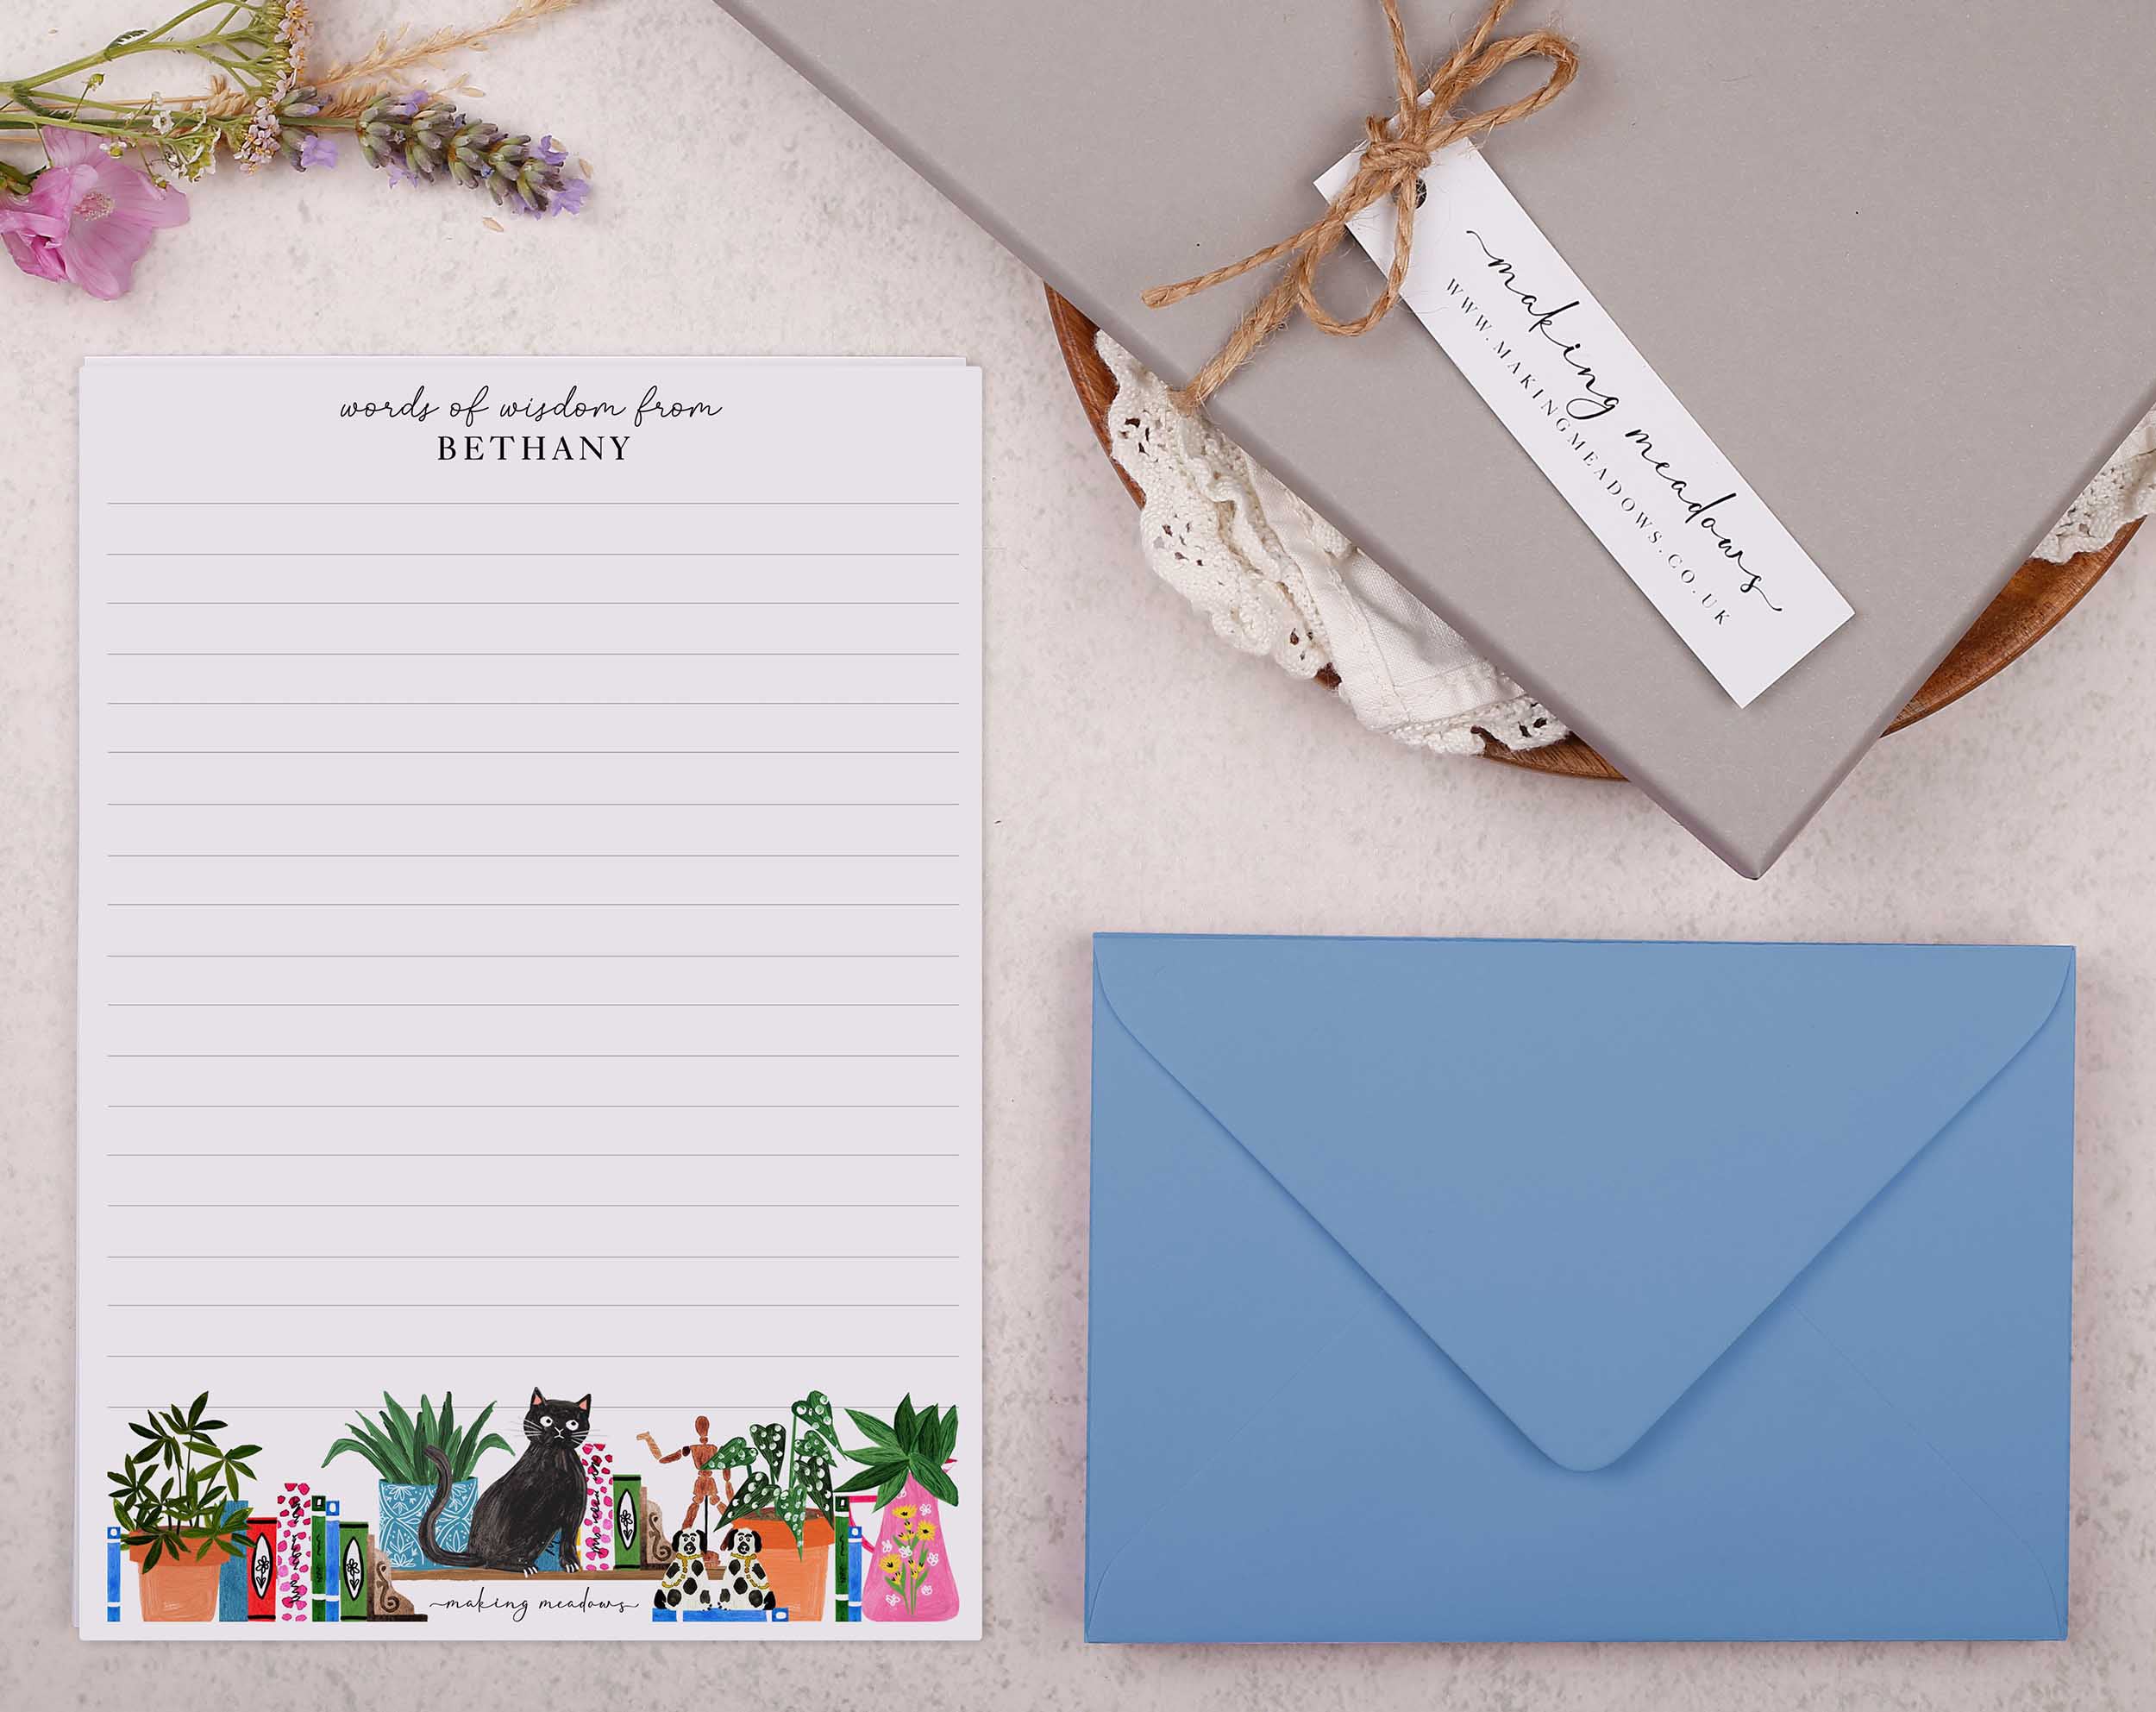 Premium personalised A5 letter writing paper set with a cheeky black cat and a bookcase bursting with books and trinkets.